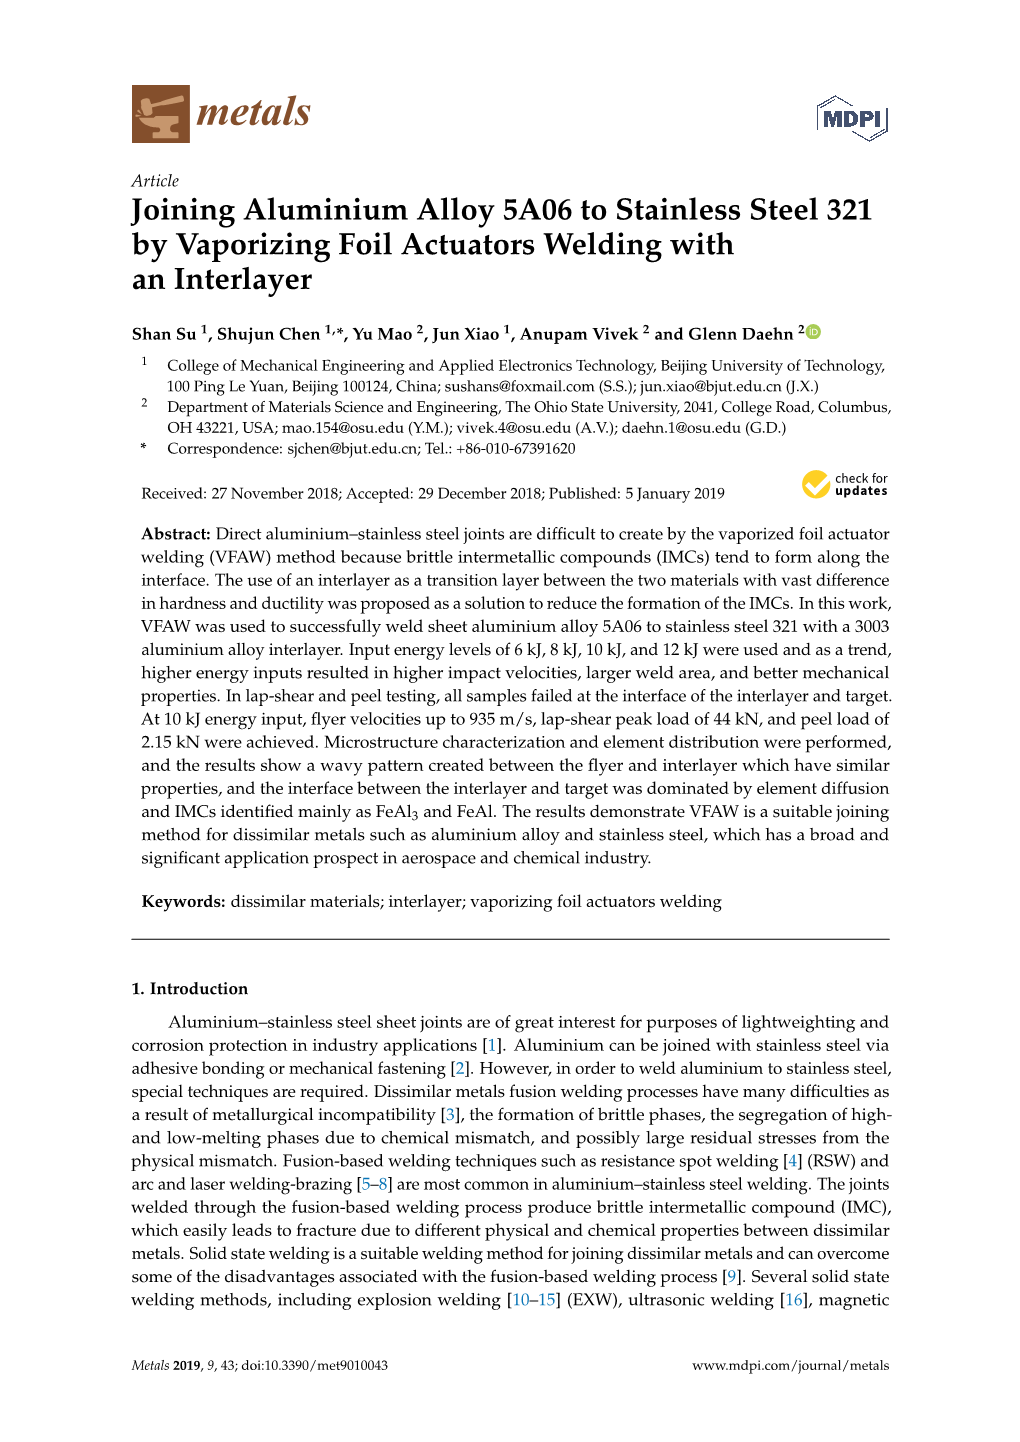 Joining Aluminium Alloy 5A06 to Stainless Steel 321 by Vaporizing Foil Actuators Welding with an Interlayer